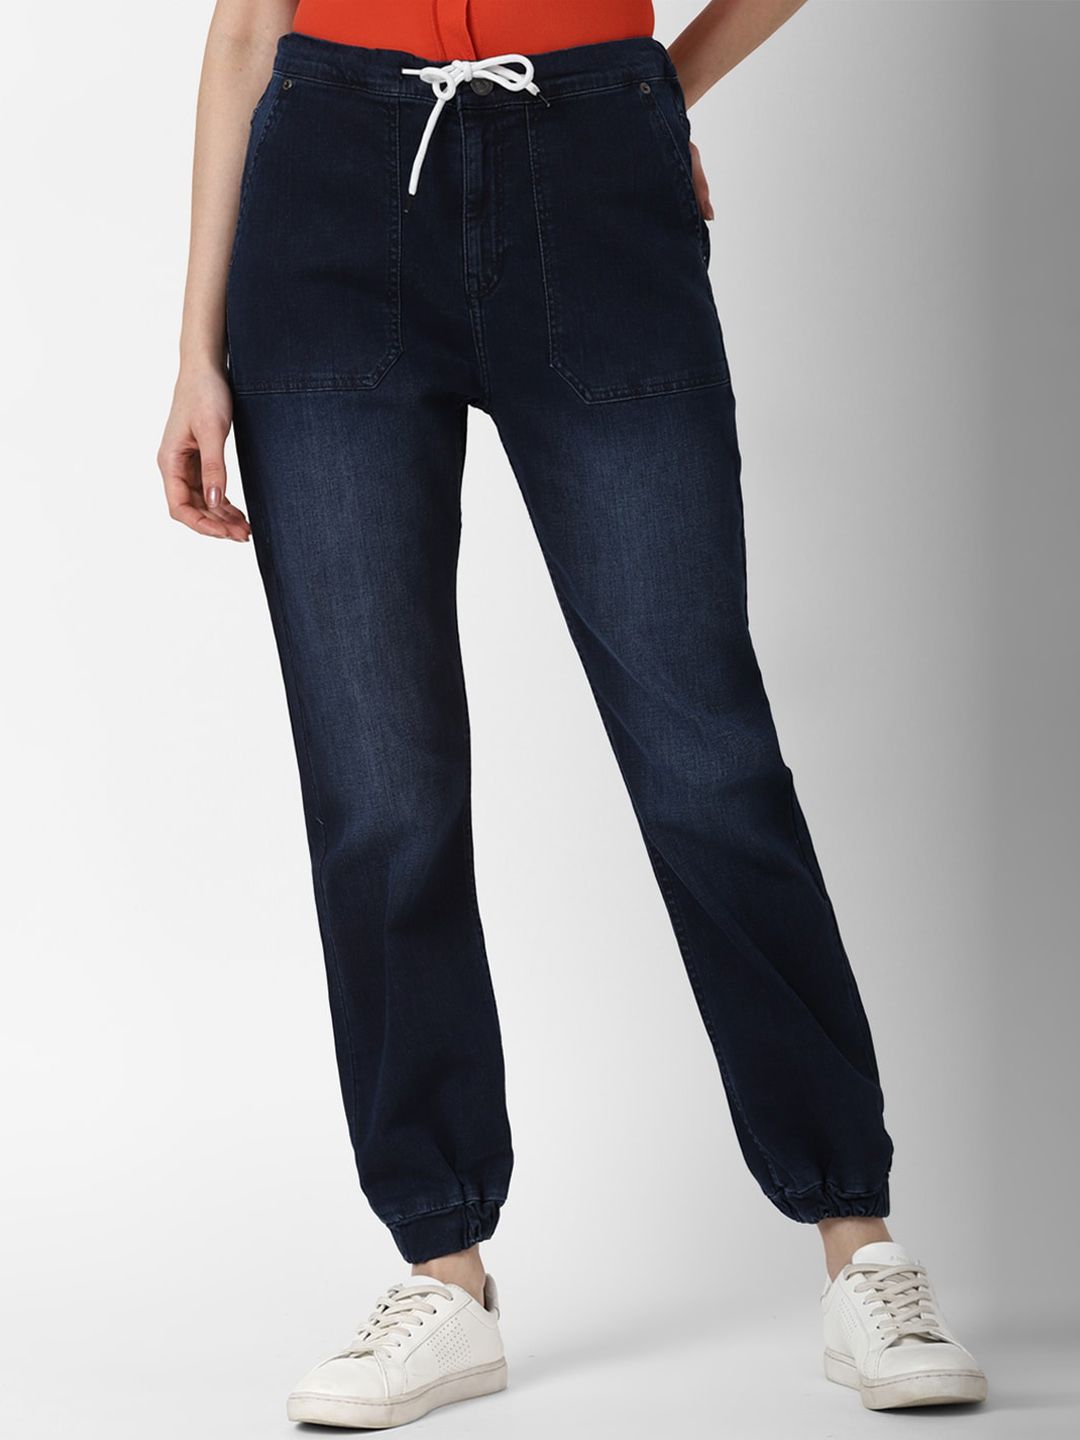 FOREVER 21 Women Blue Light Fade Jeans Price in India